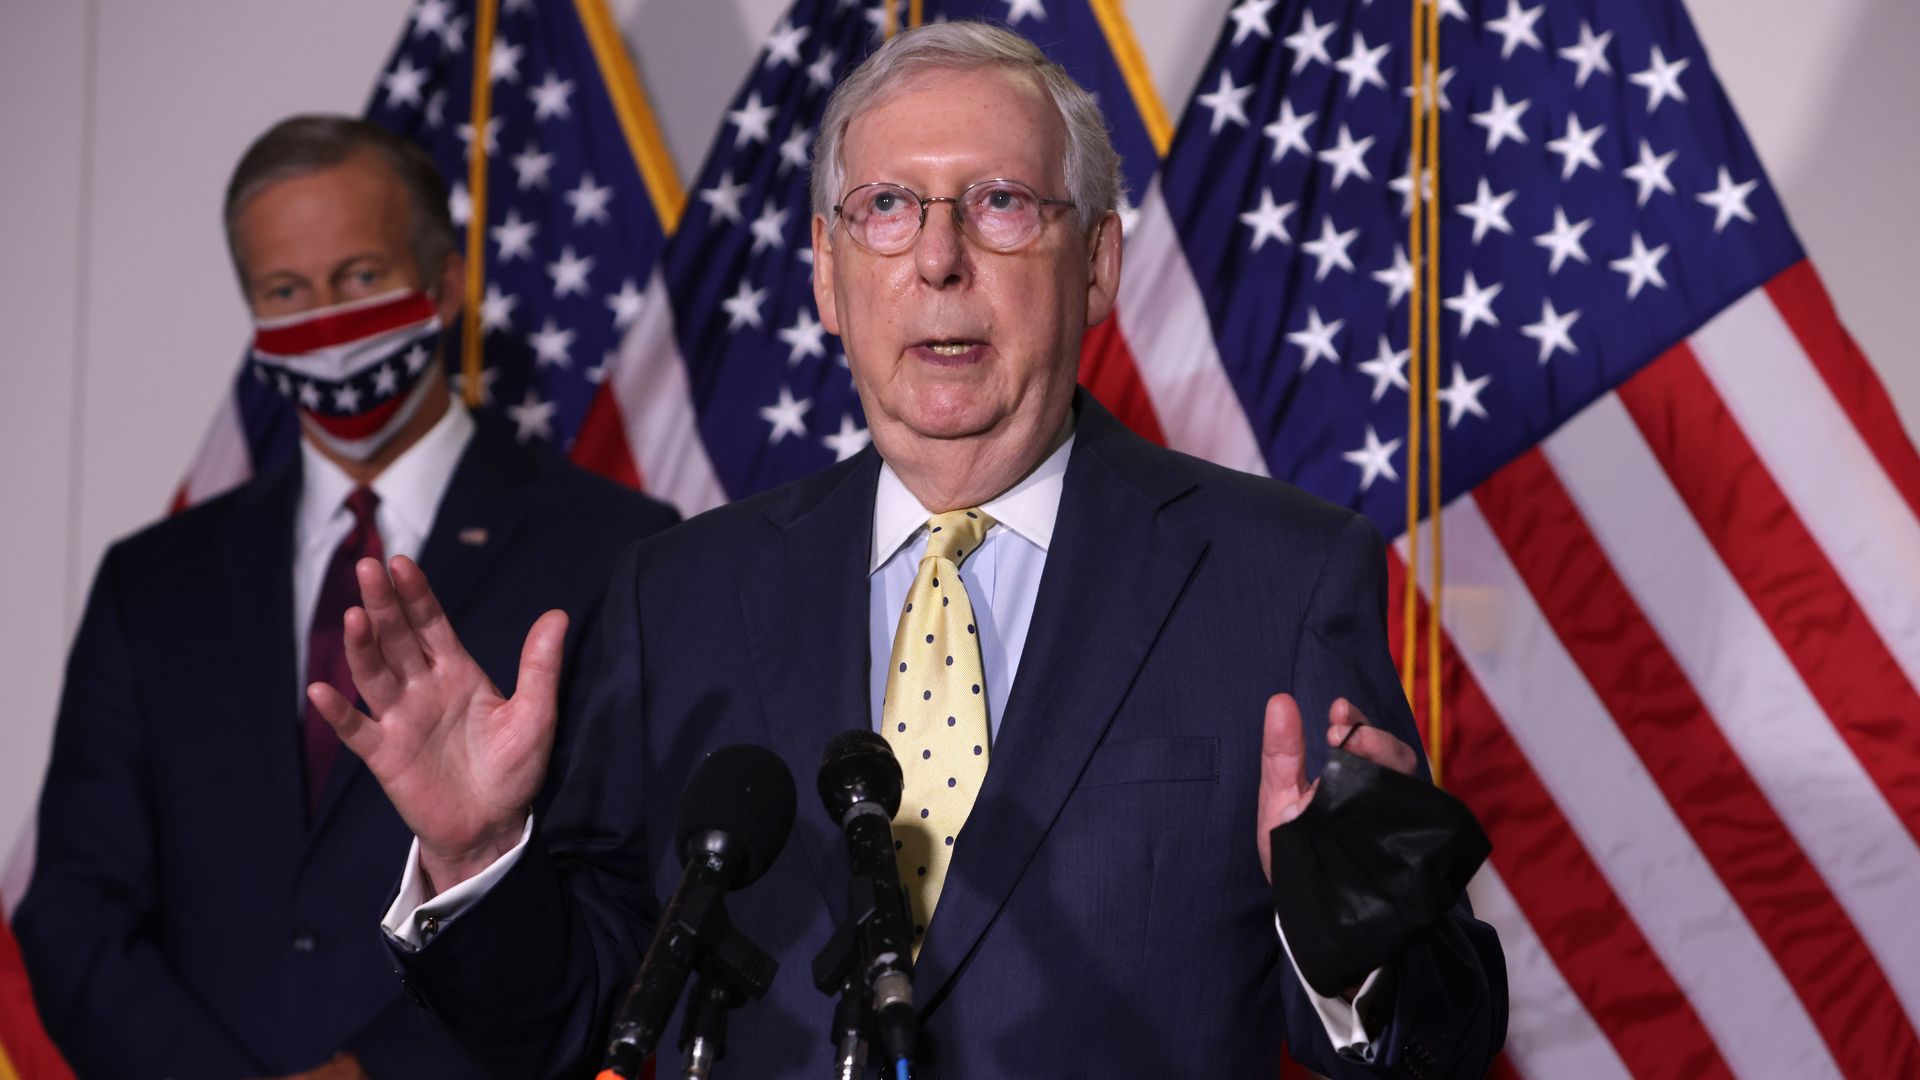 Senate Leader Mitch McConnell gives a press conference